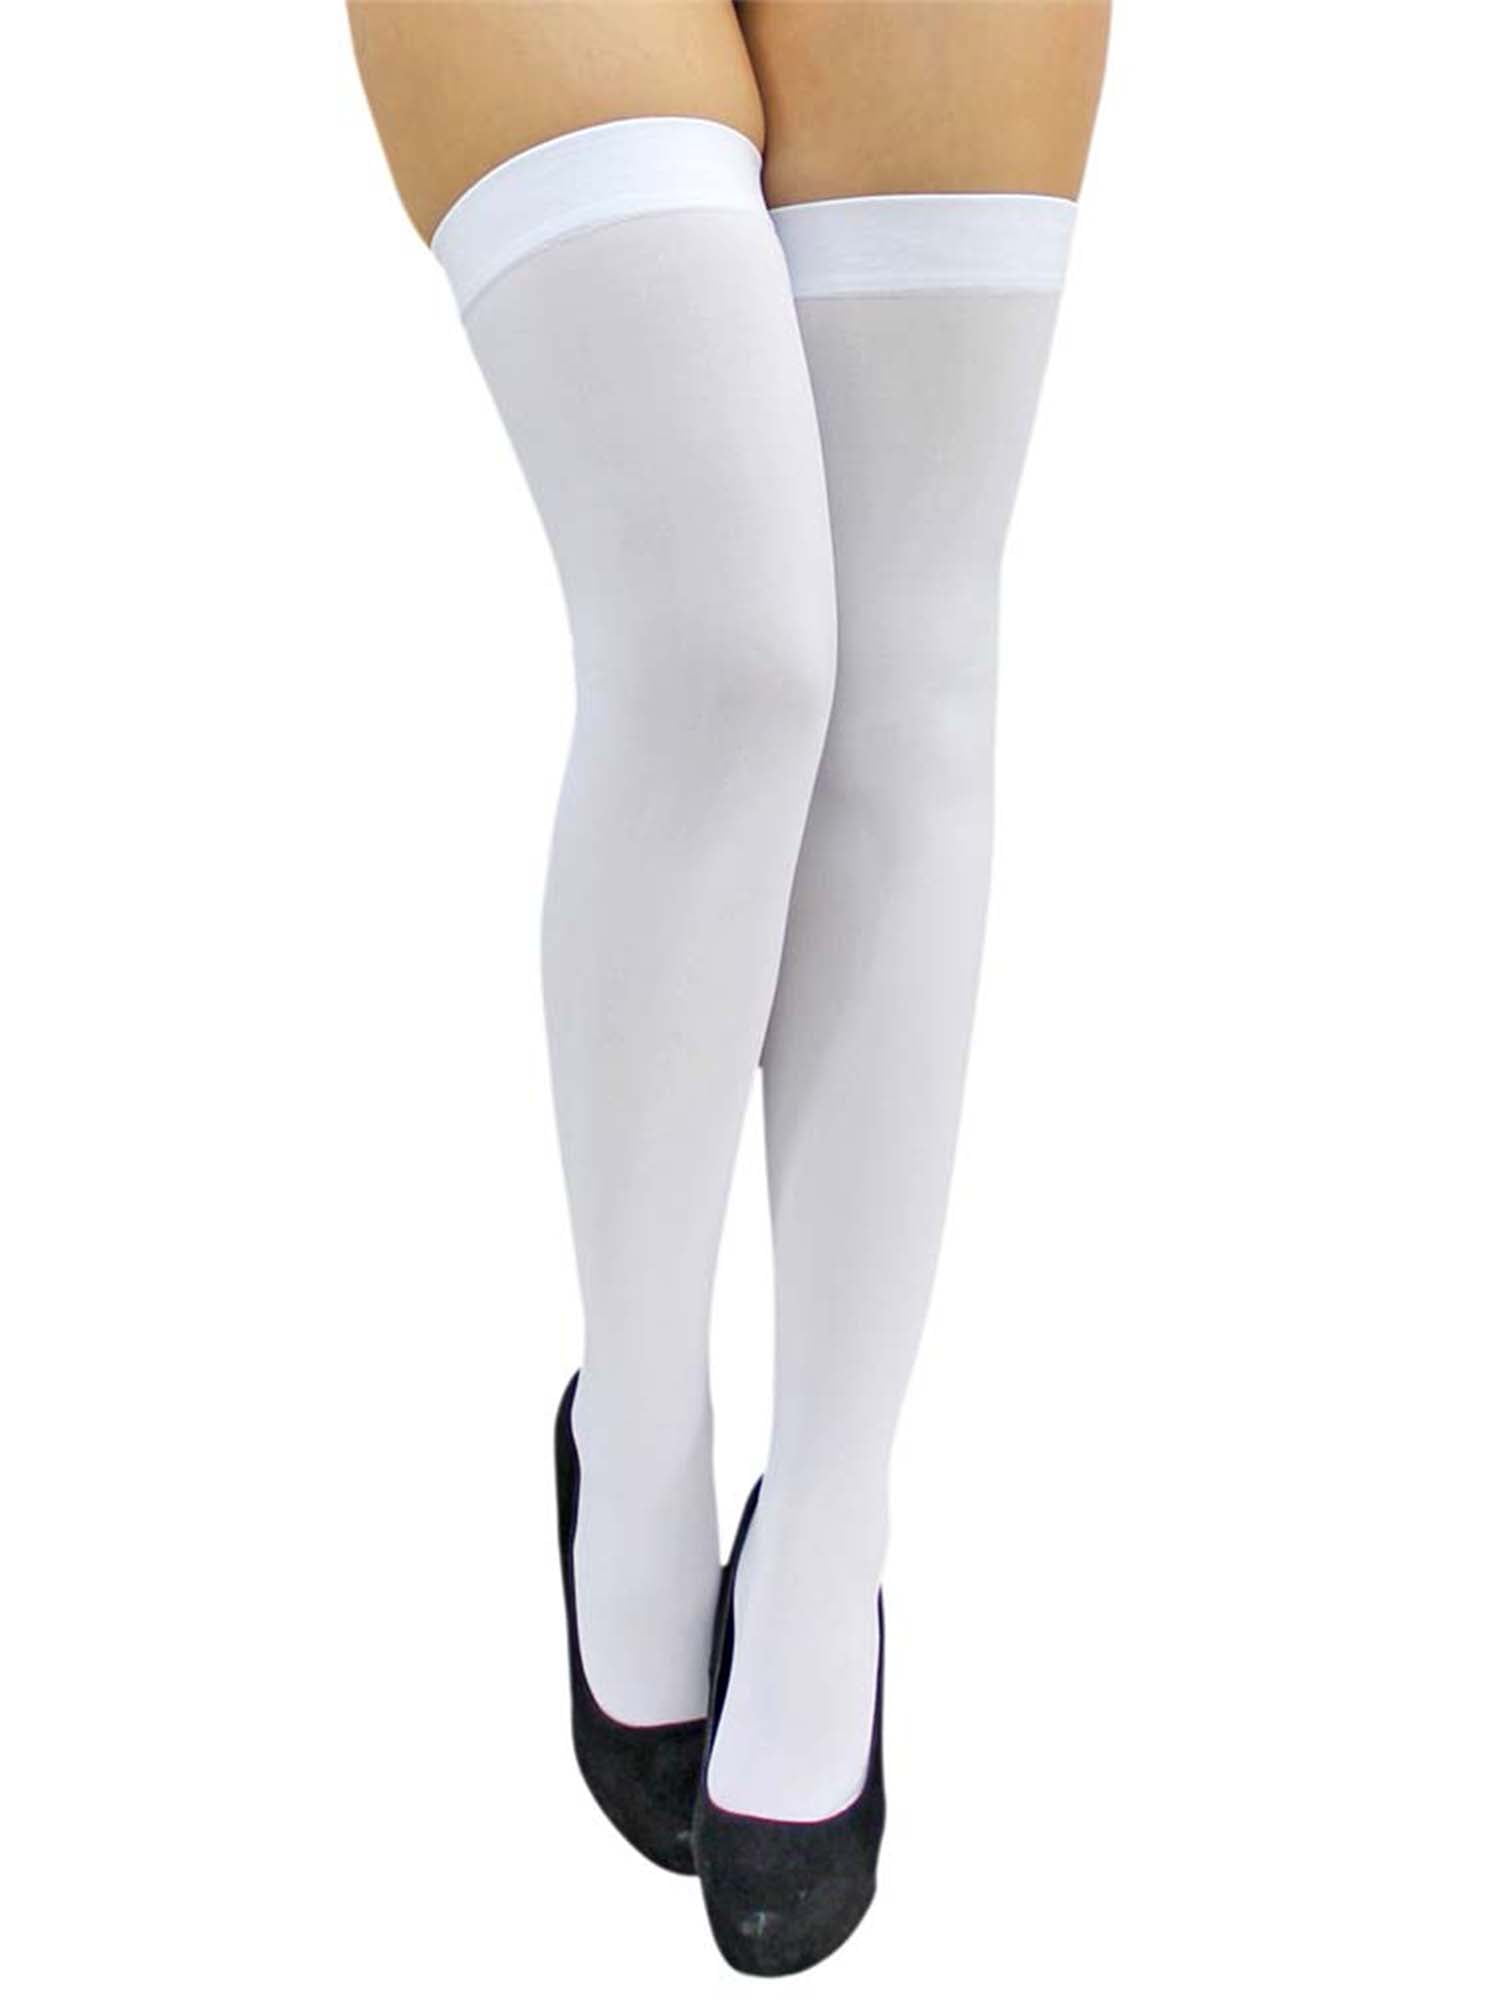 top Lady's LaceThigh-High Stockings Woman Pantyhose Socks underwear Lingerie 